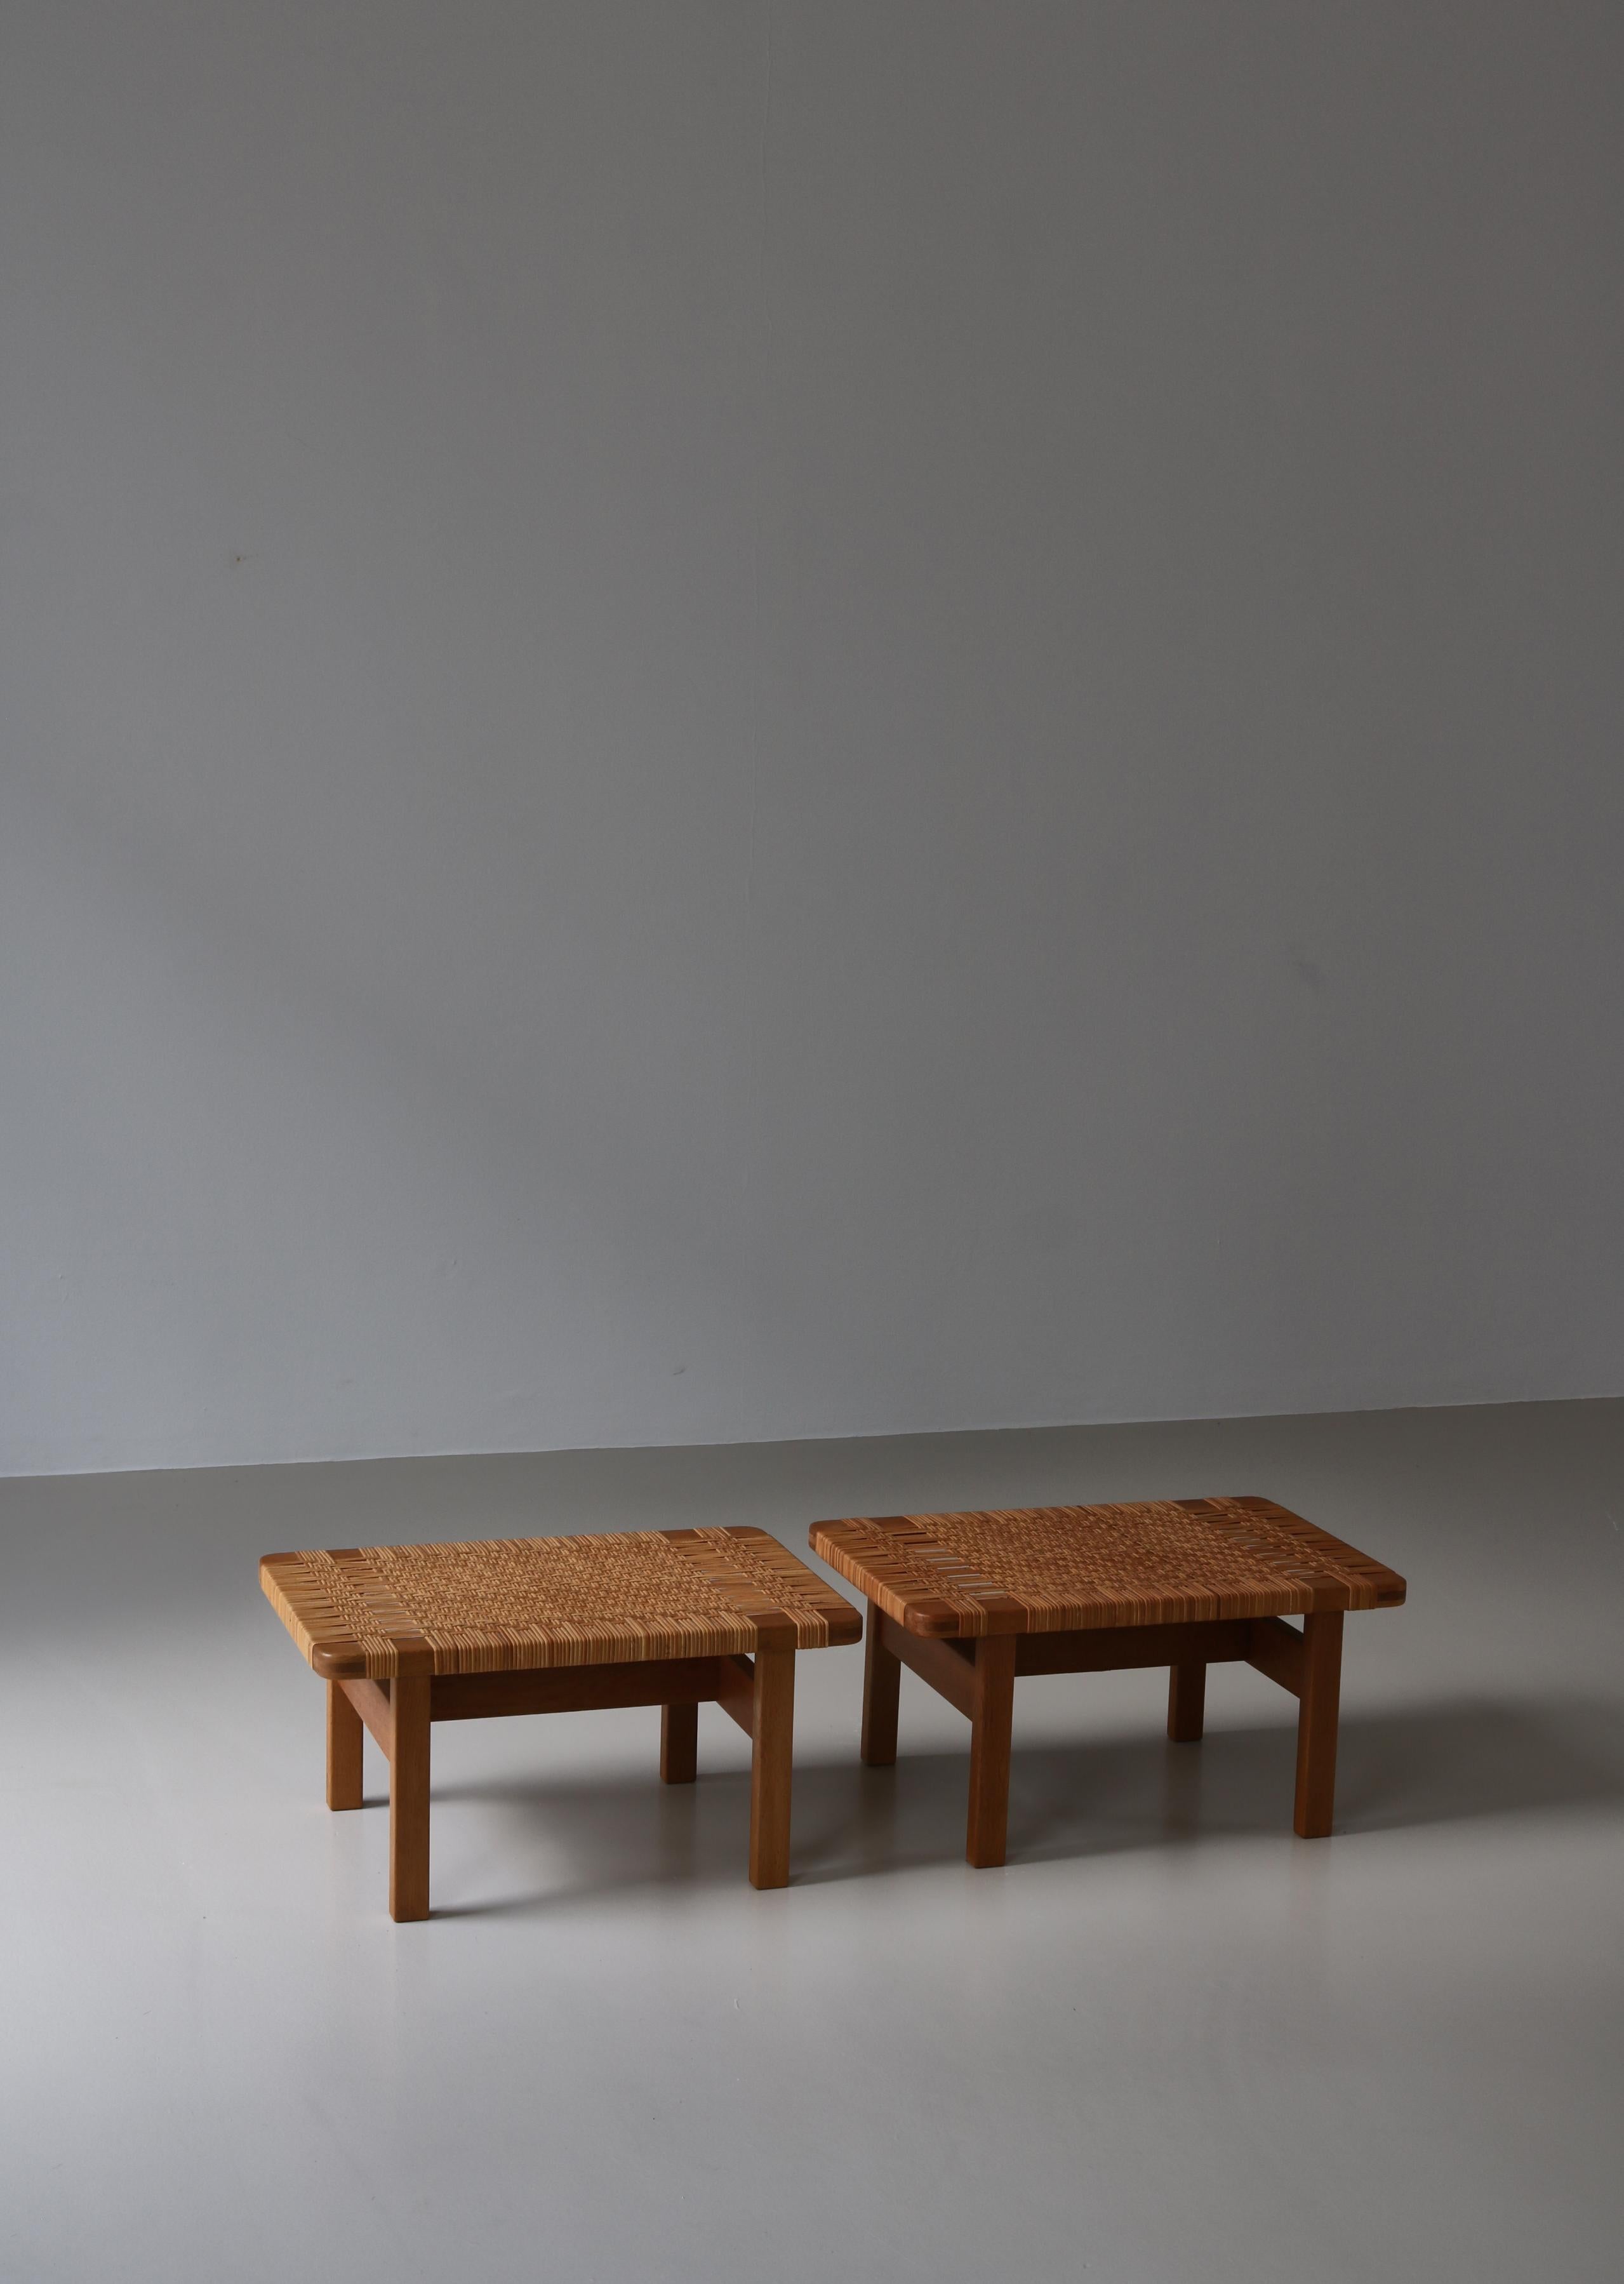 Amazing set of Danish modern side tables or benches in solid oak and handwoven rattan cane by Danish architect Borge Mogensen. Mogensen designed this model in the 1950s when it was made in different sizes by Fredericia Stolefabrik, Denmark. This